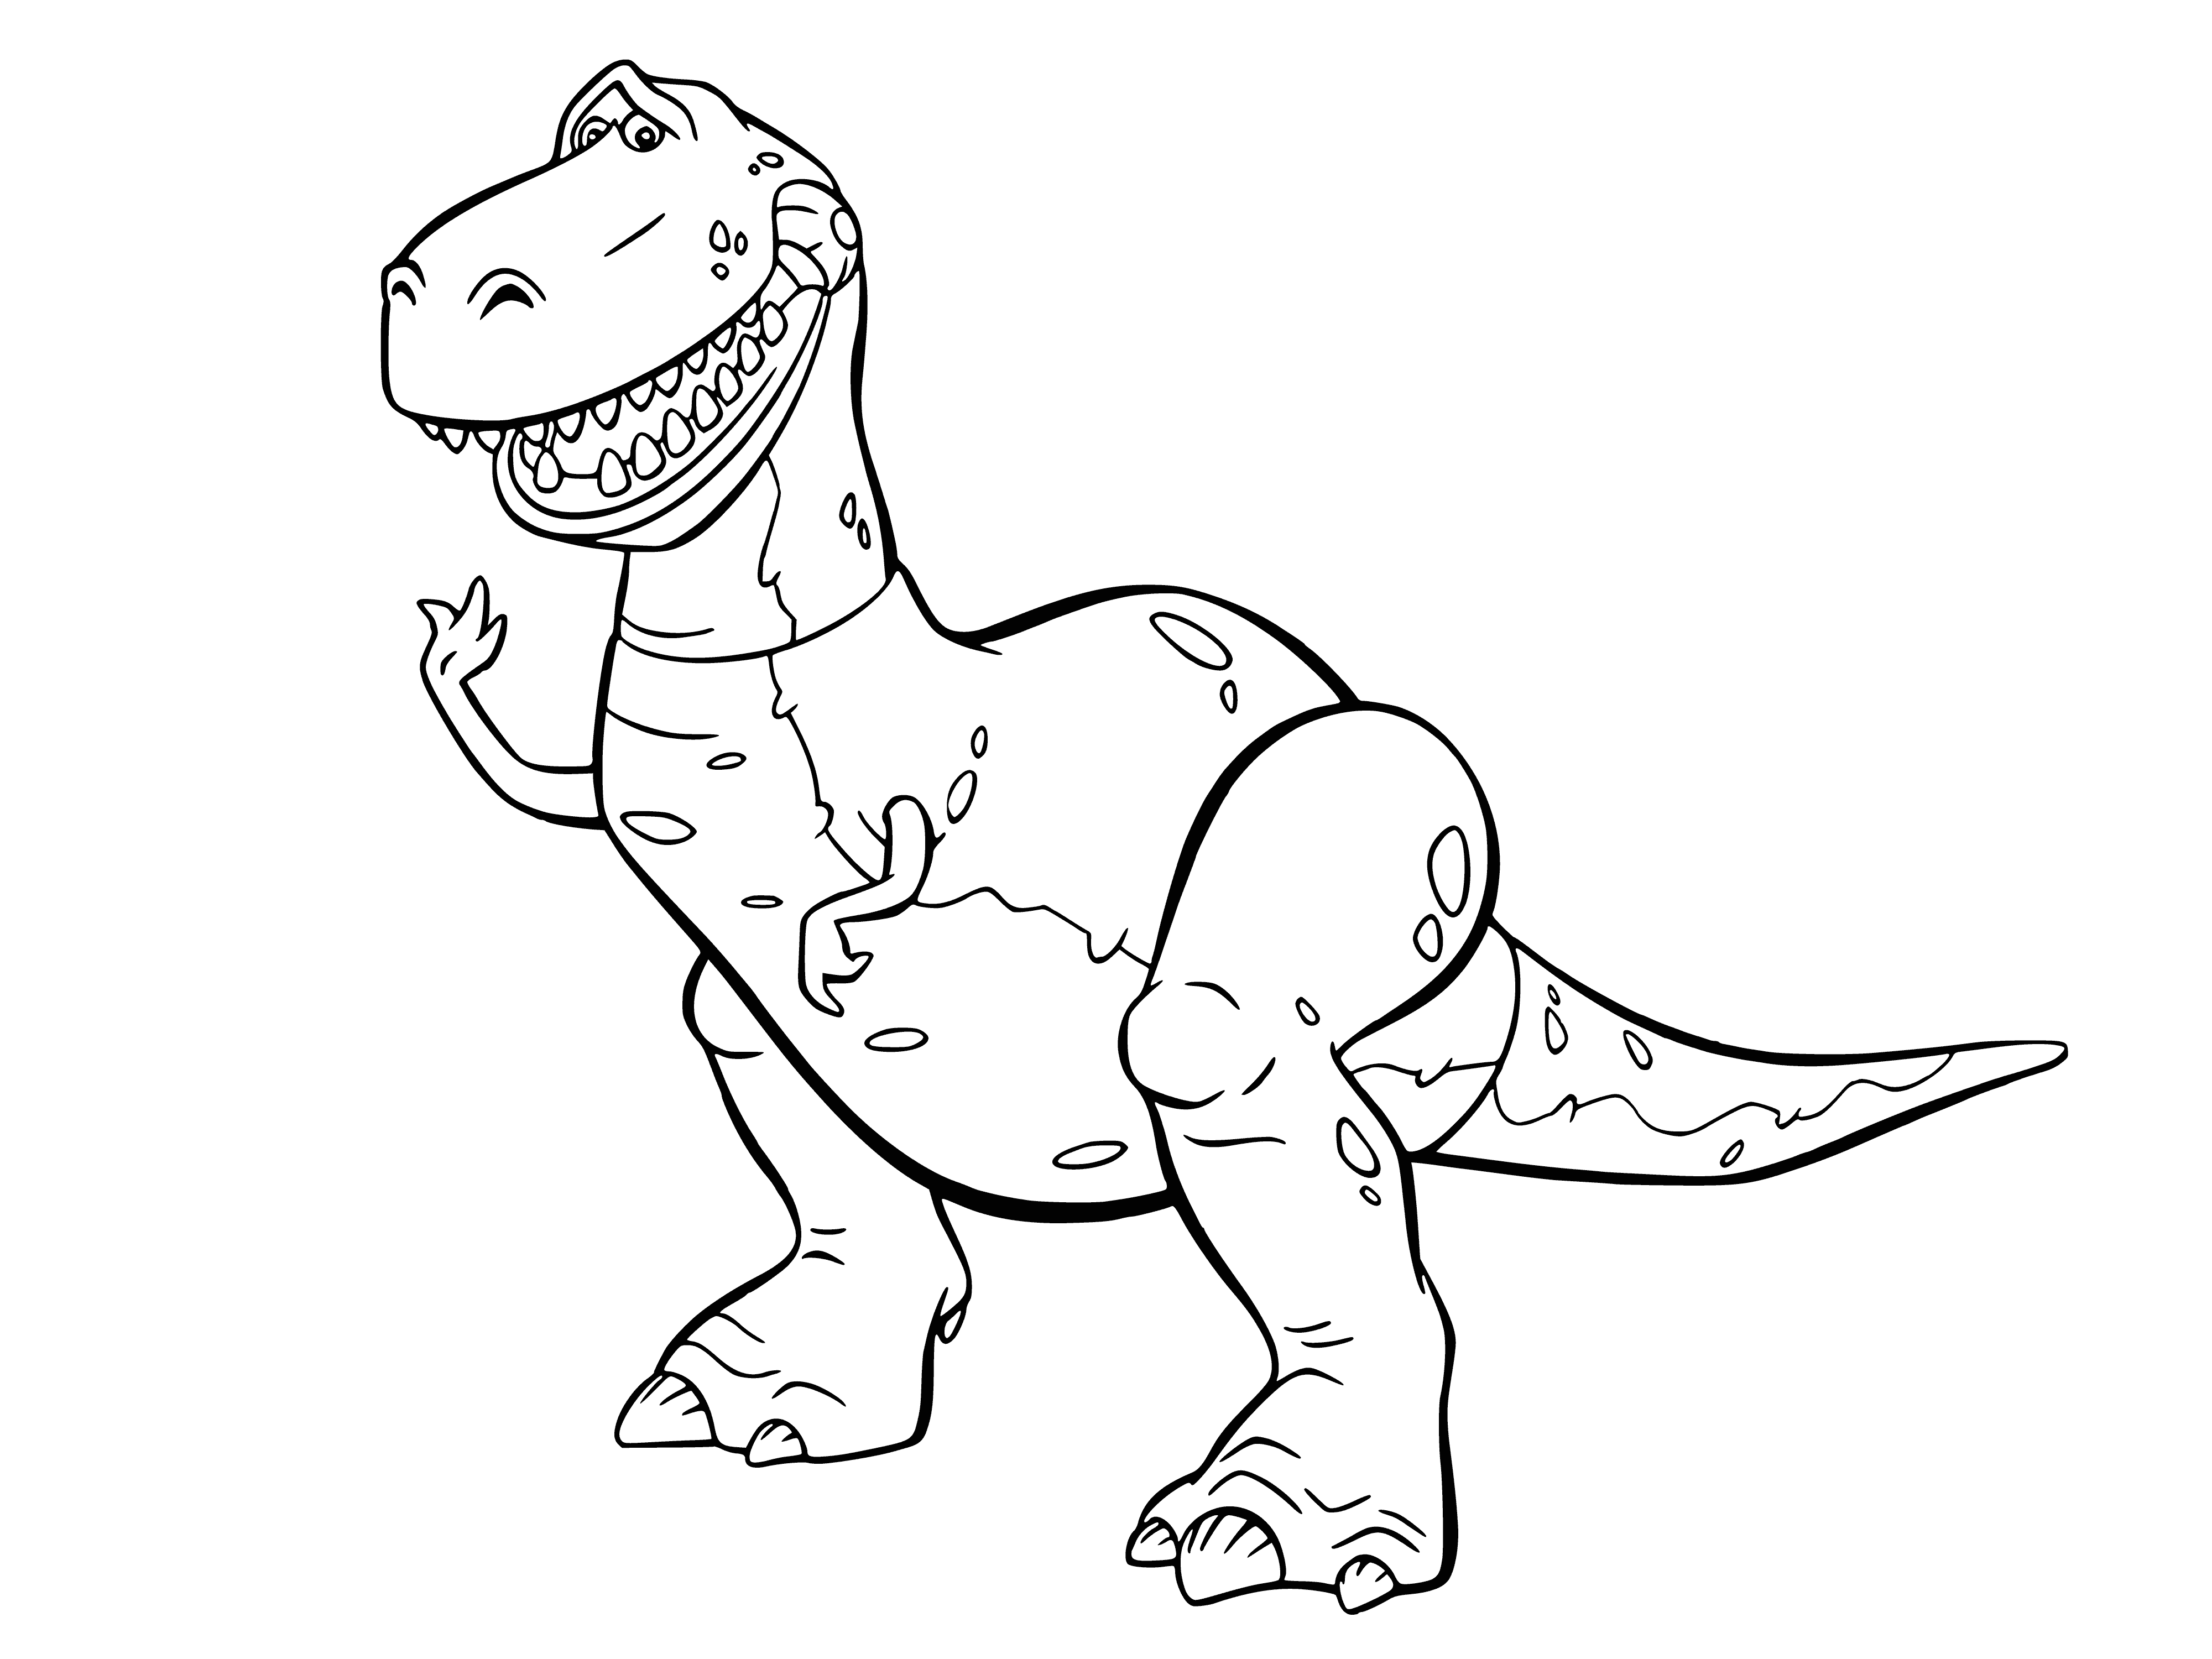 coloring page: Rex is a happy, green dino with red spots, two horns, long neck/tail, two arms/legs, standing in a grassy field with a blue sky & white clouds.